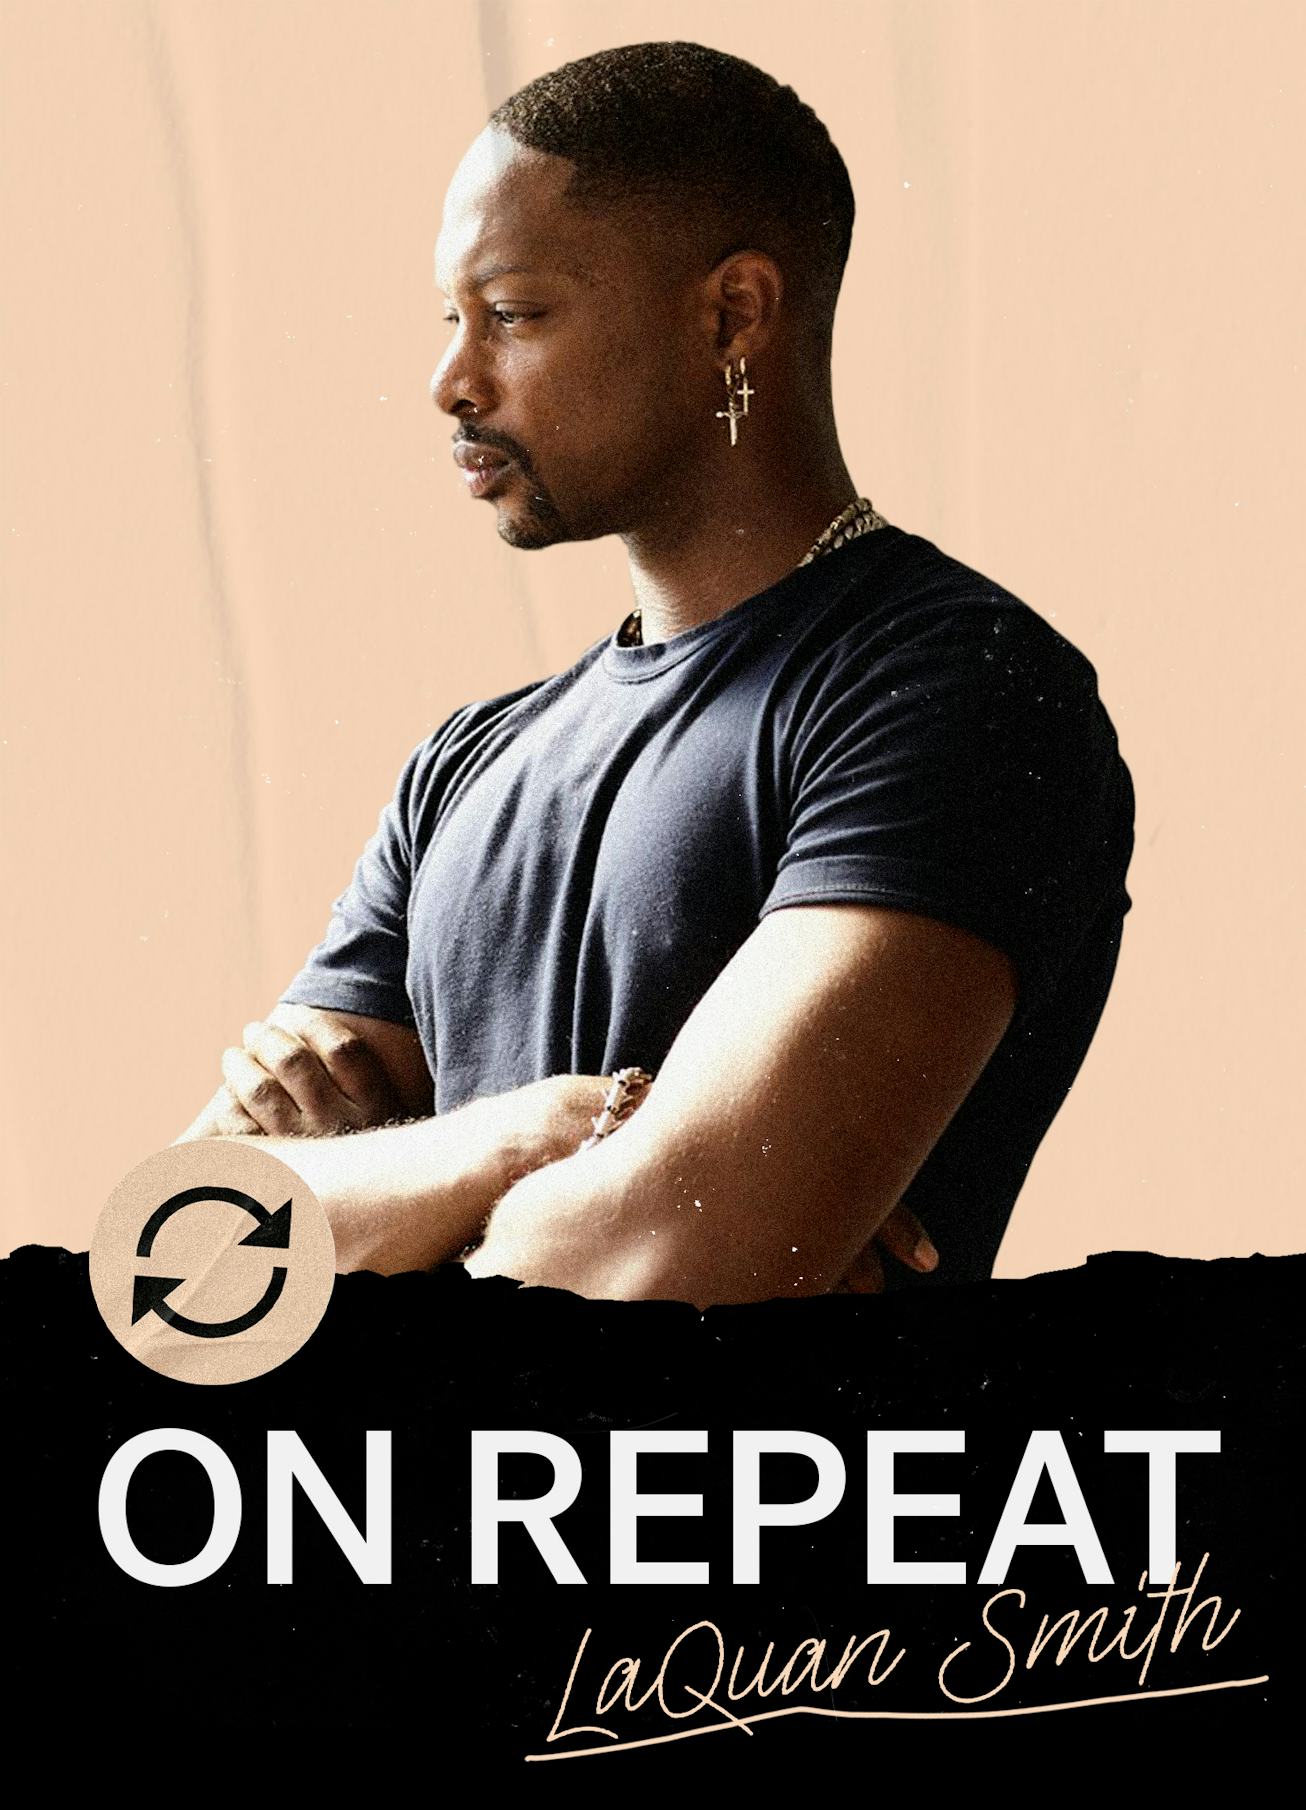 LaQuan Smith in a black T-shirt posing for a cover of NYLON’s “On Repeat”, sharing his favorite play...